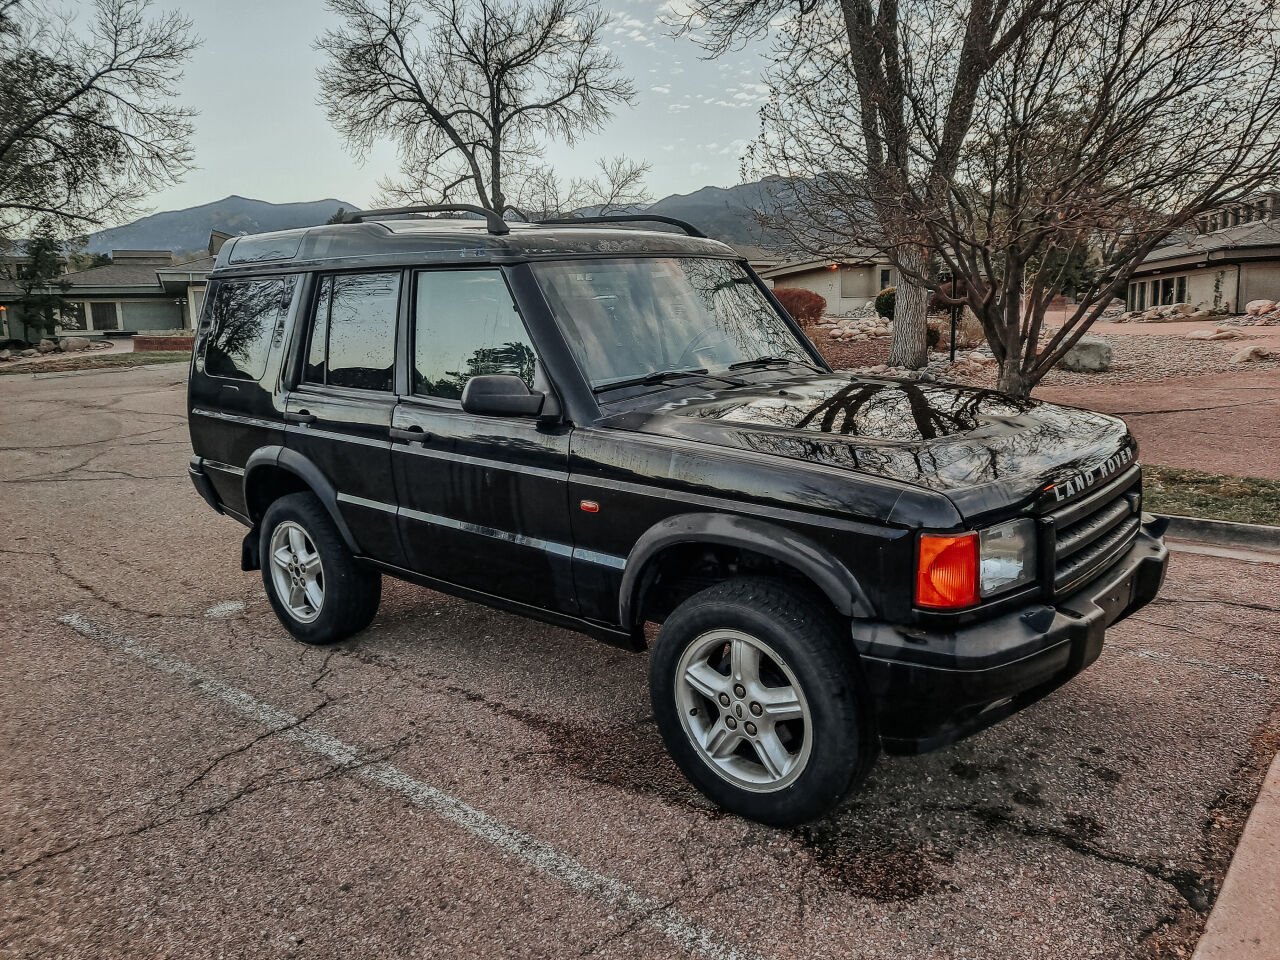 1999 Land Rover Discovery For Sale - Carsforsale.com®